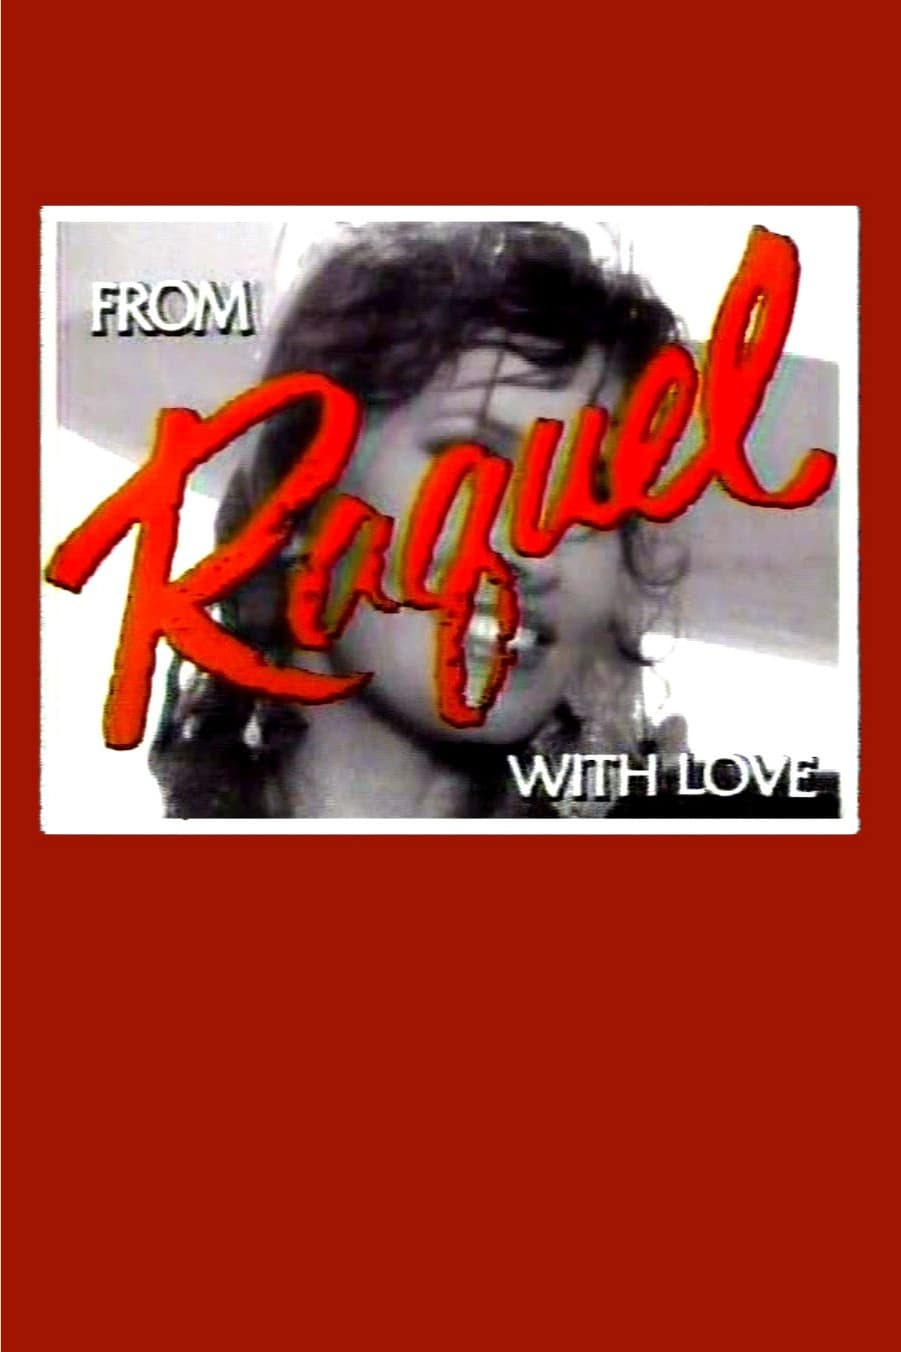 From Raquel with Love (1980)